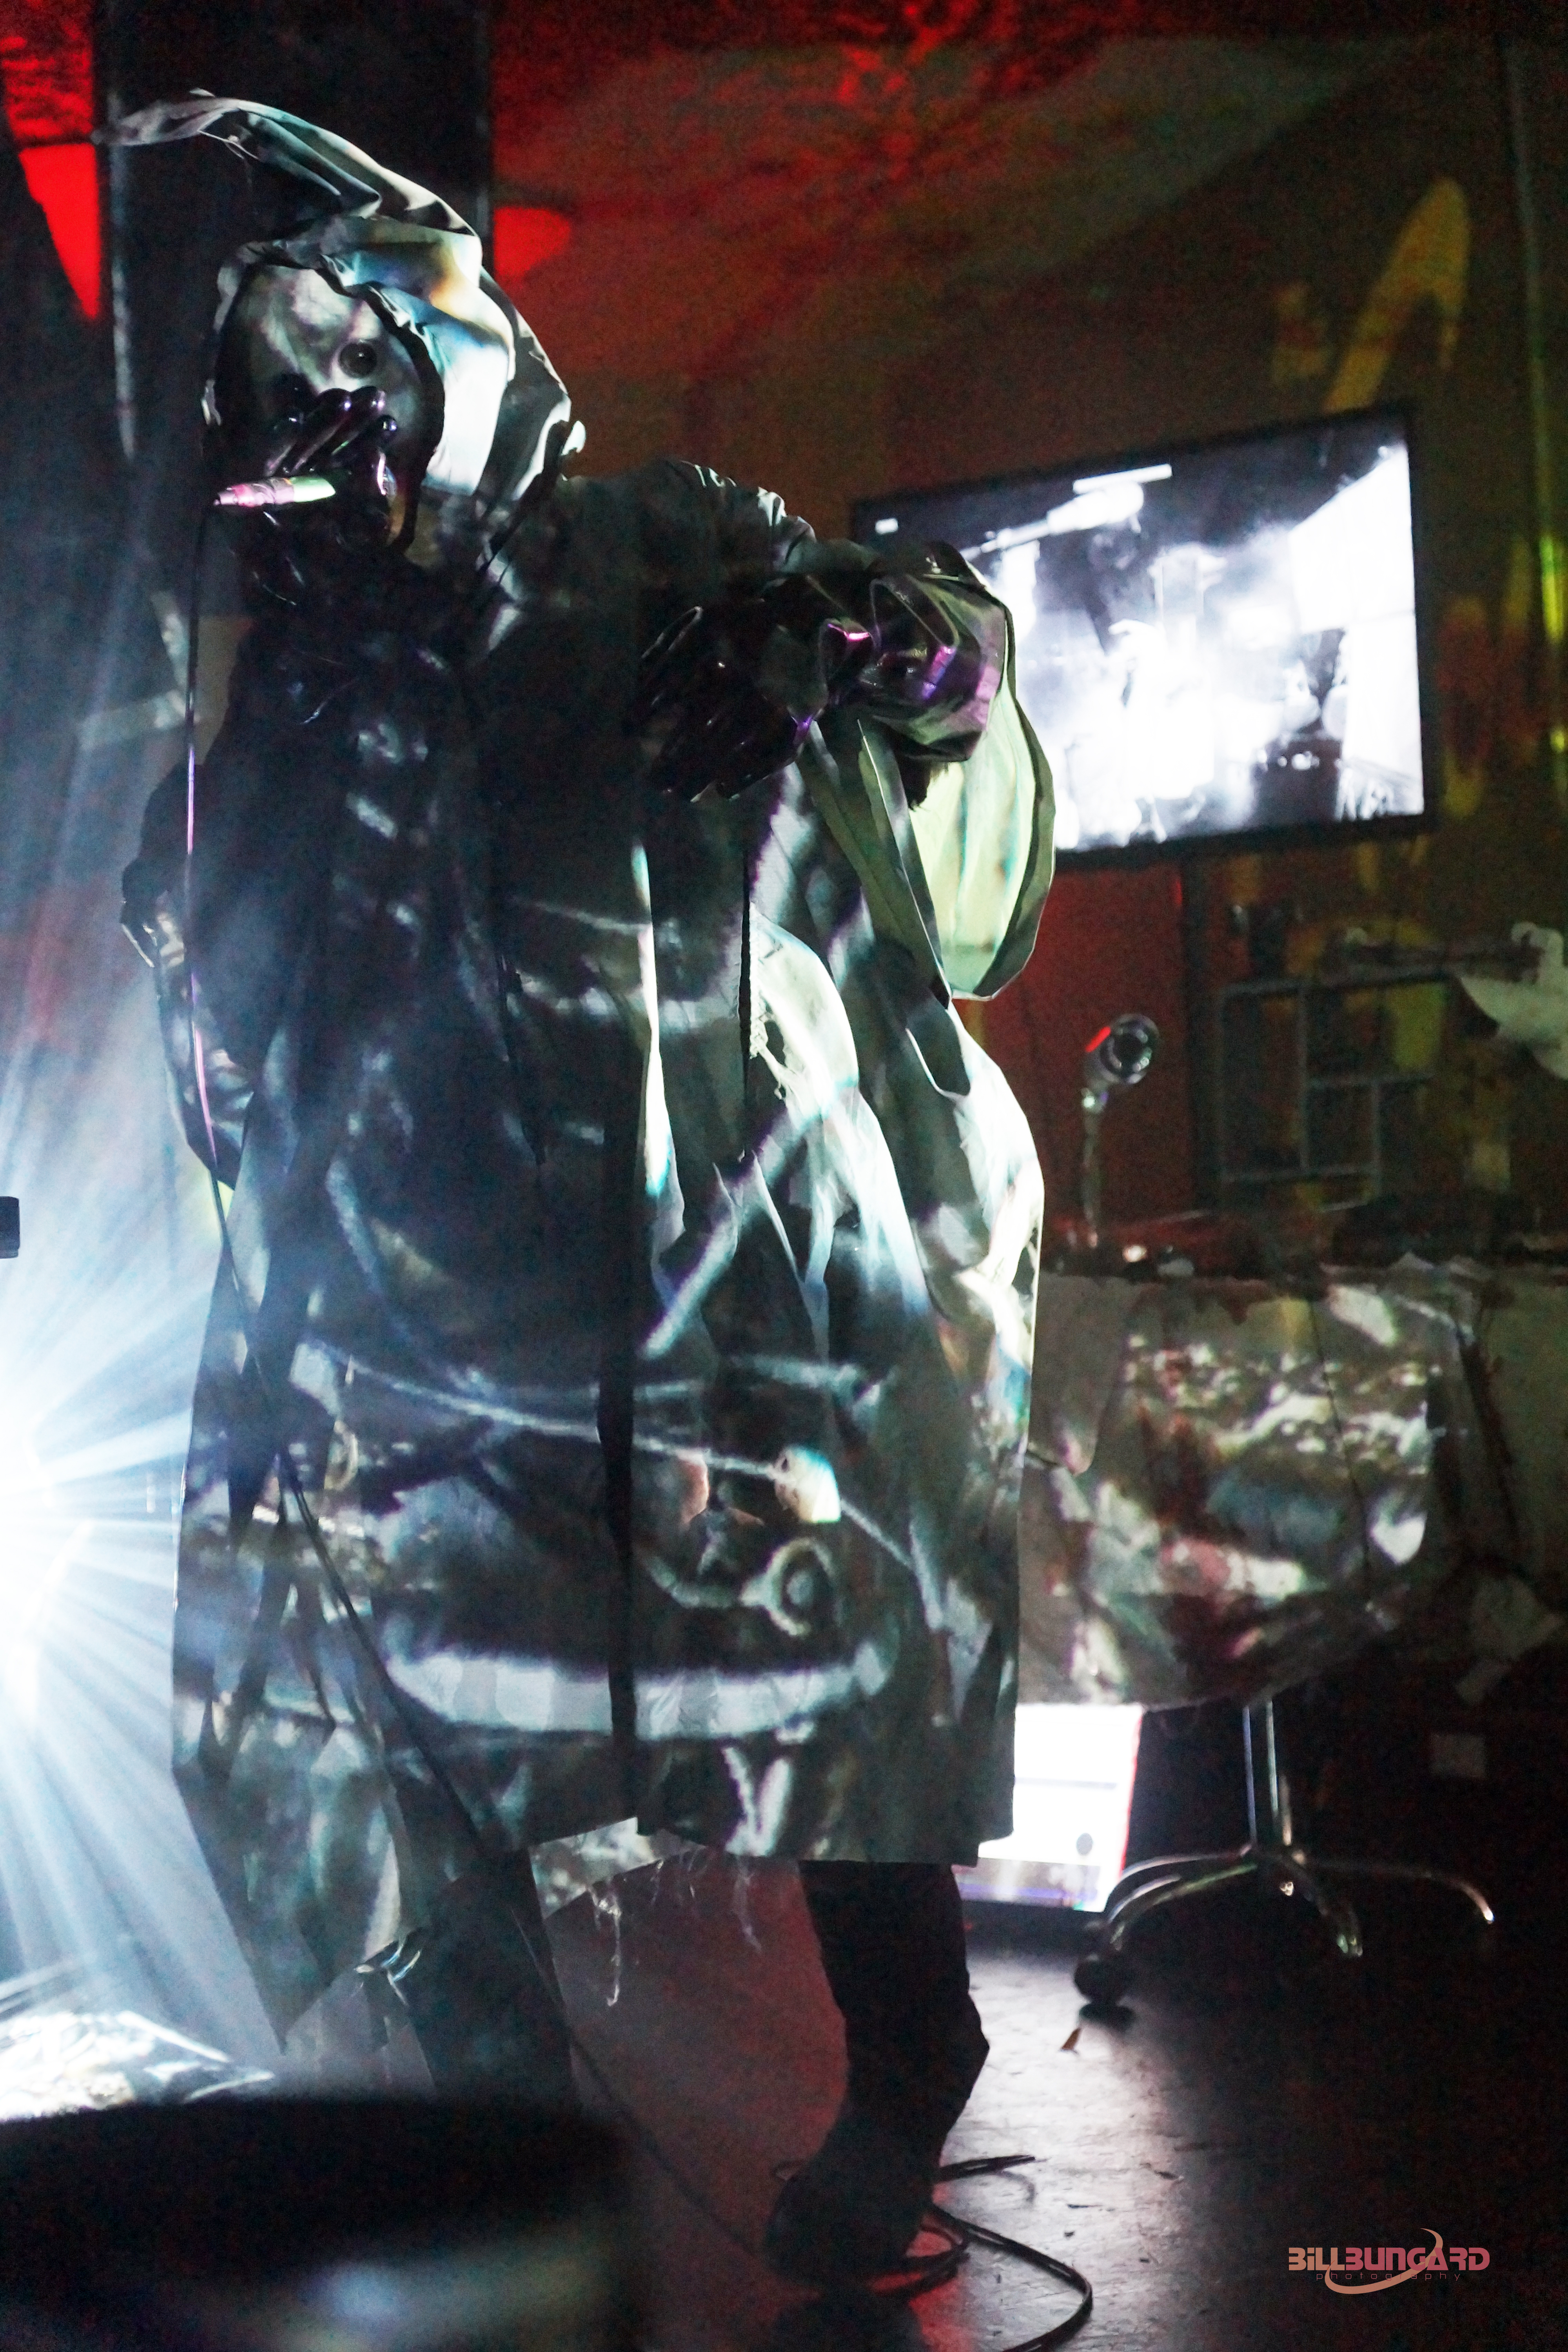 Skinny Puppy Live at Showbox (Photo by Bill Bungard)